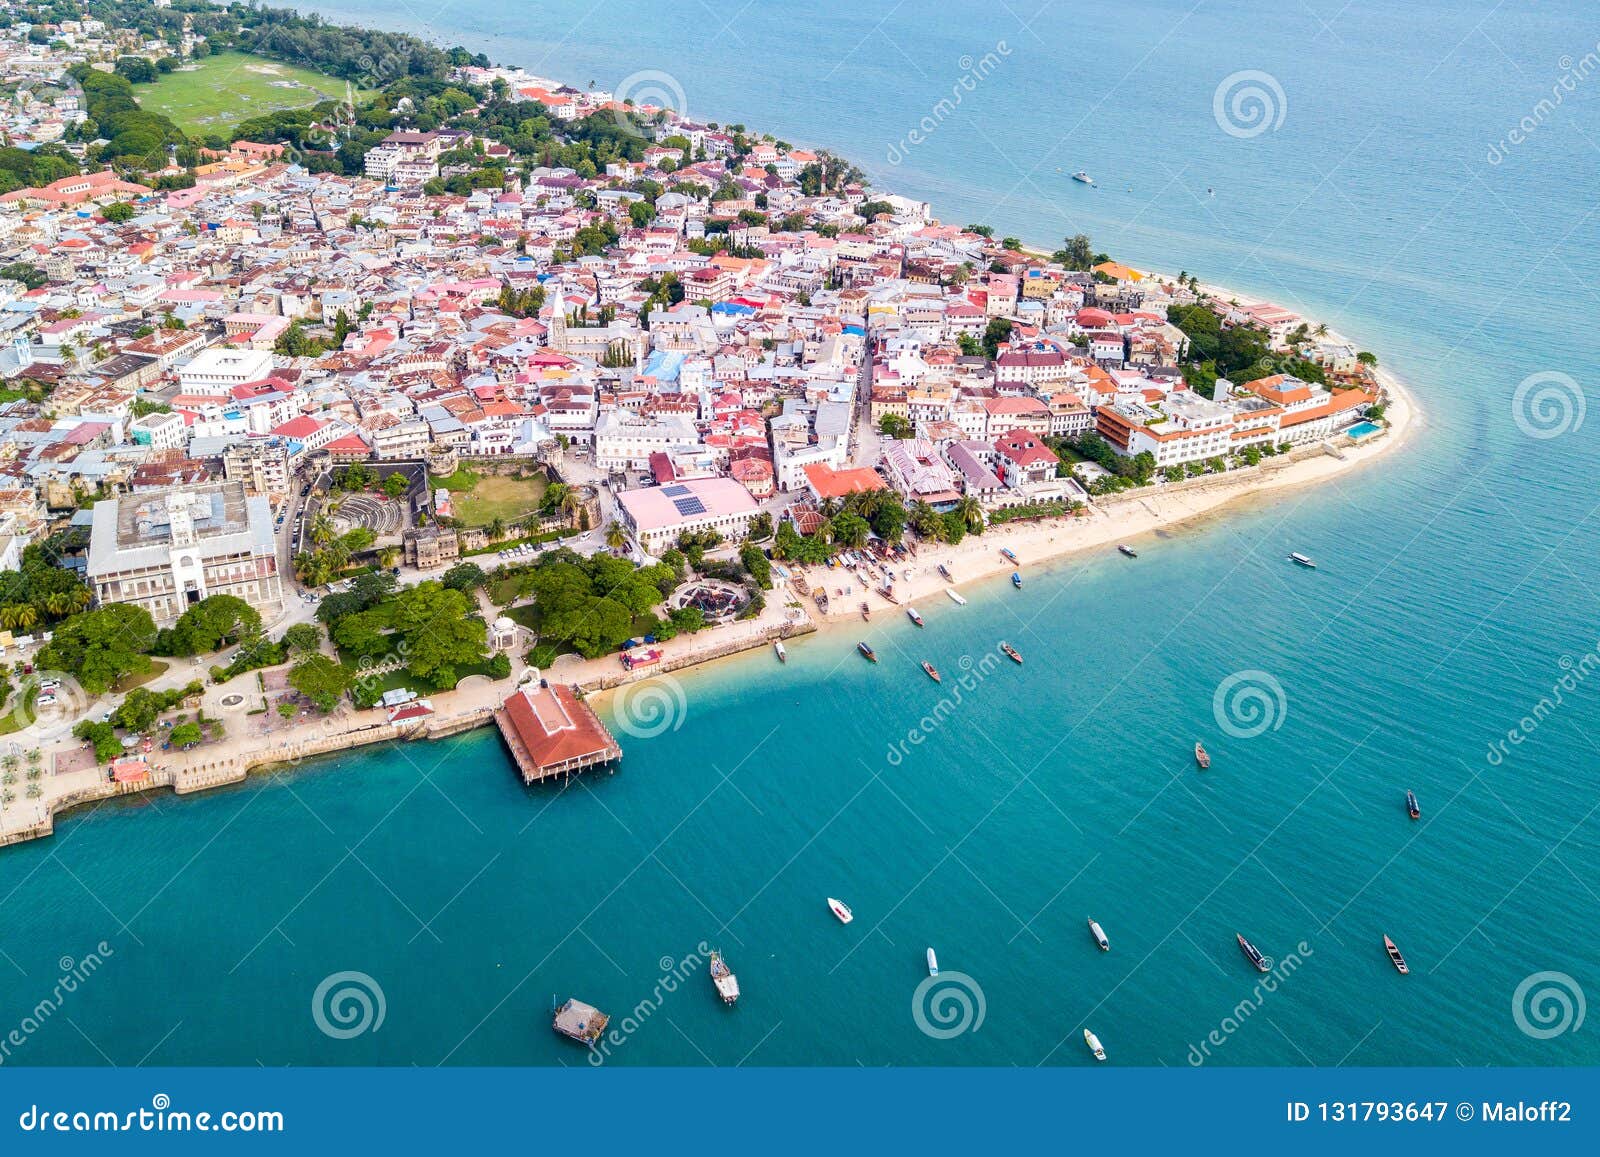 stone town, old colonial center of zanzibar city. house of wonders. the old fort. unguja, tanzania. aerial view.